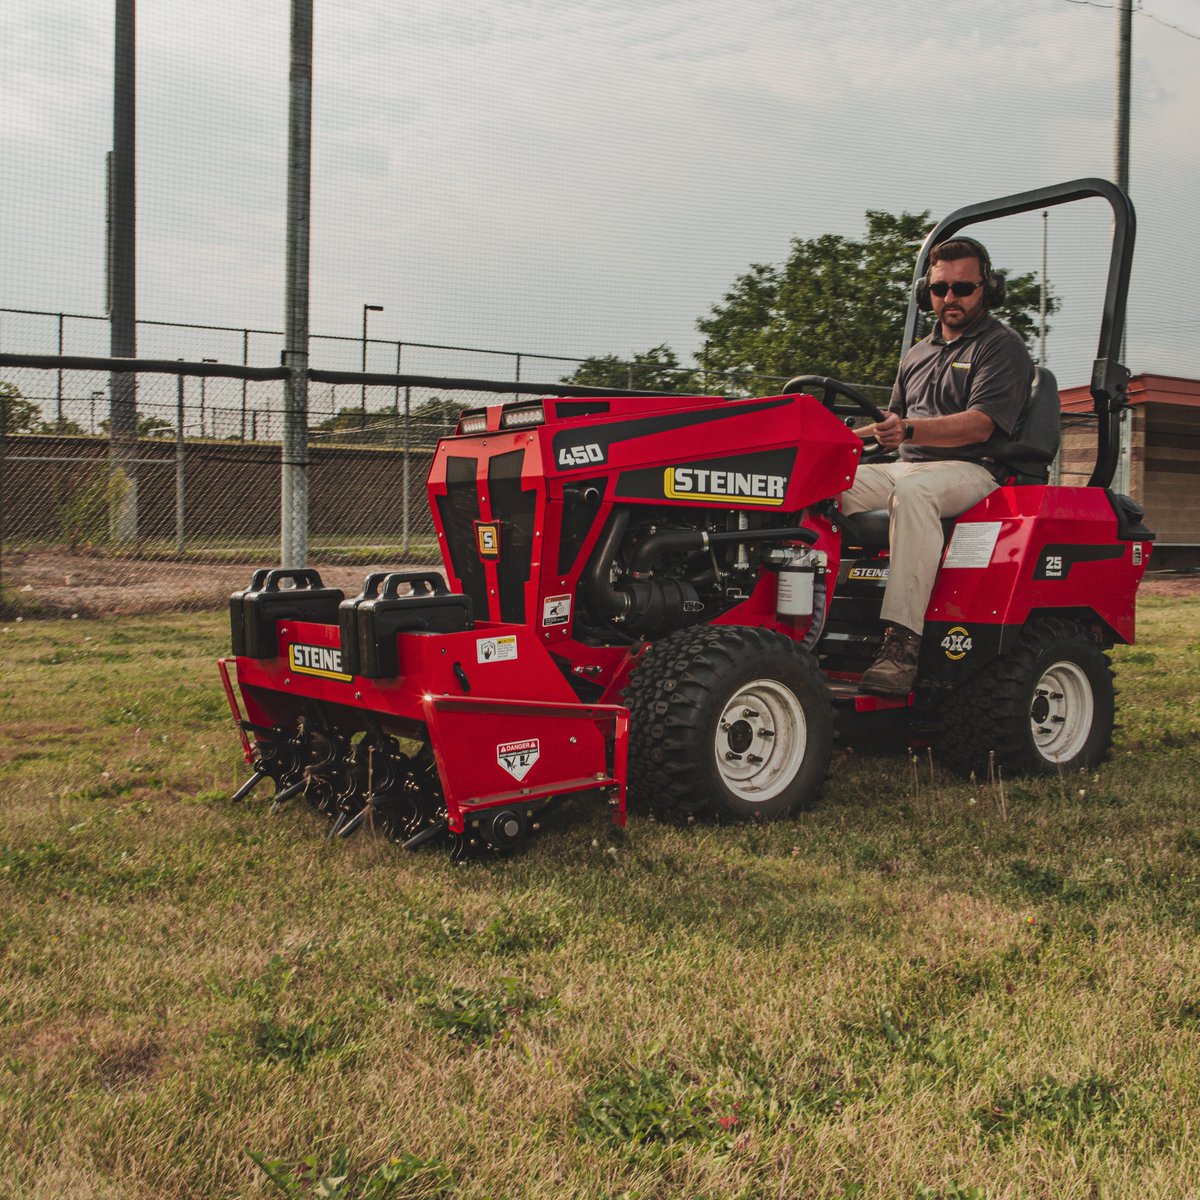 Looking to aerate this spring? Then this is the attachment for you💪😉 #SteinerTurf #SteinerTractor #Steiner450